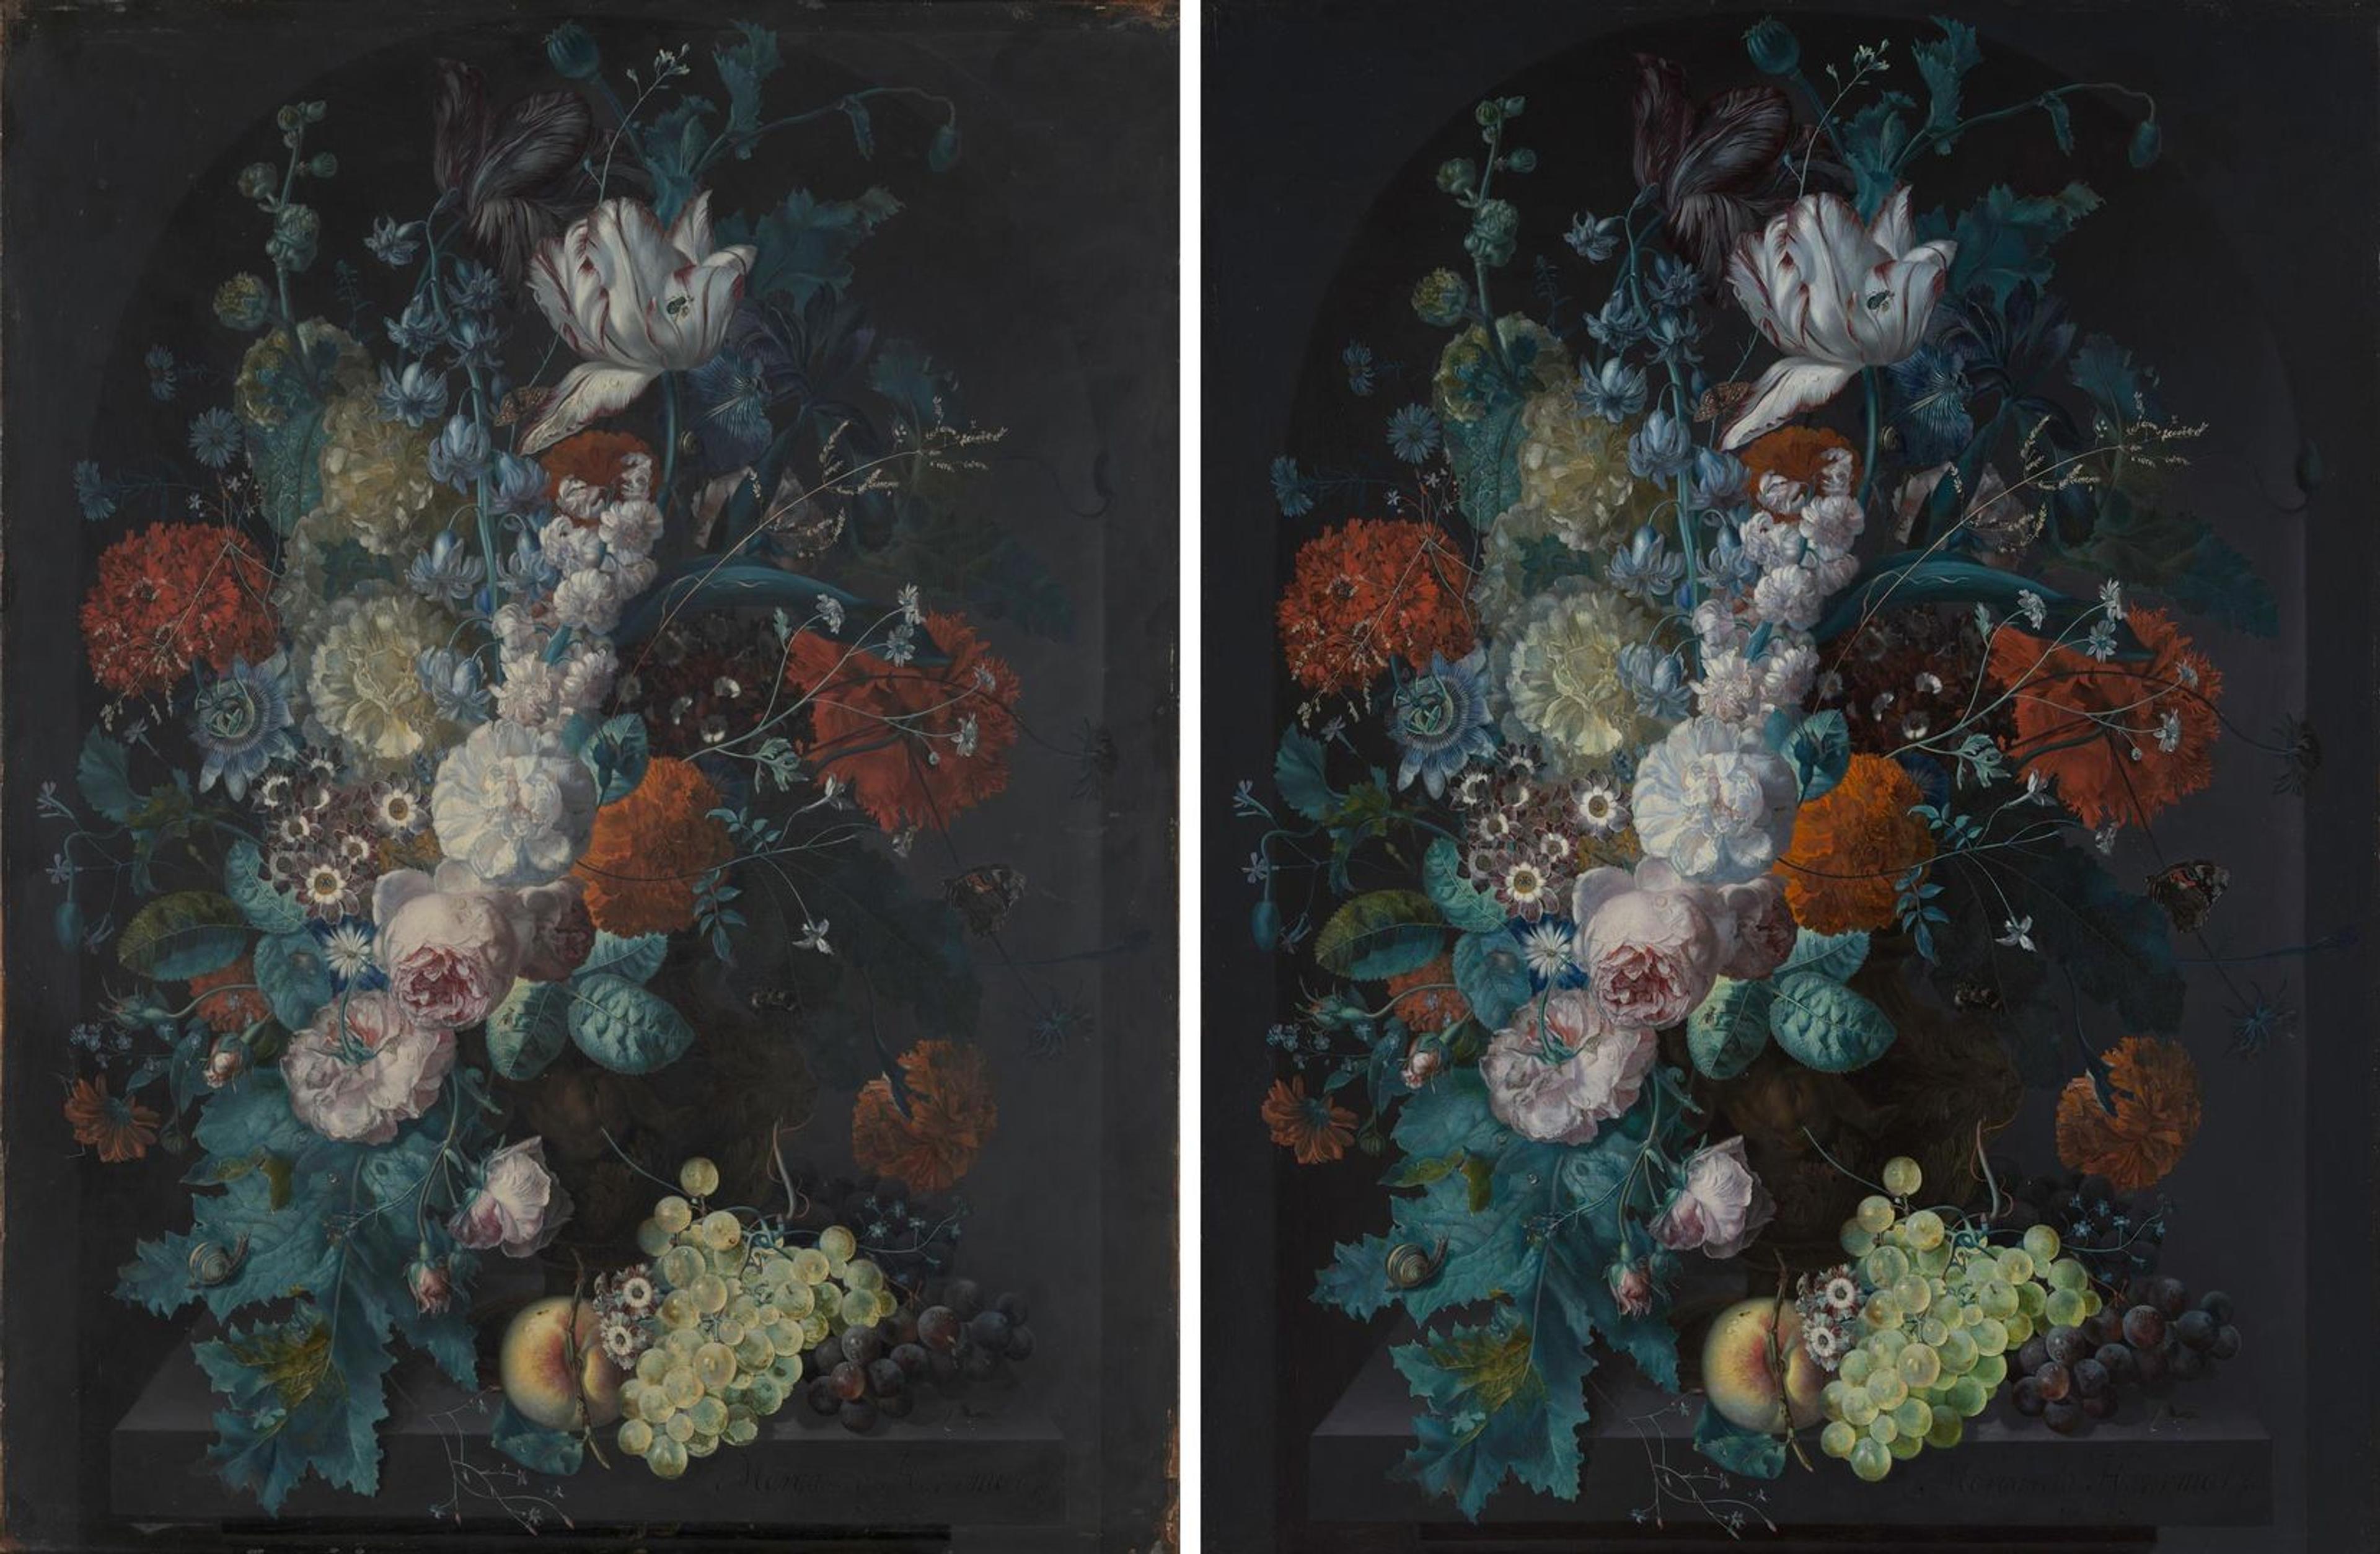 Views of Margareta Haverman's "A Vase of Flowers" before conservation treatment (left) and after (right)